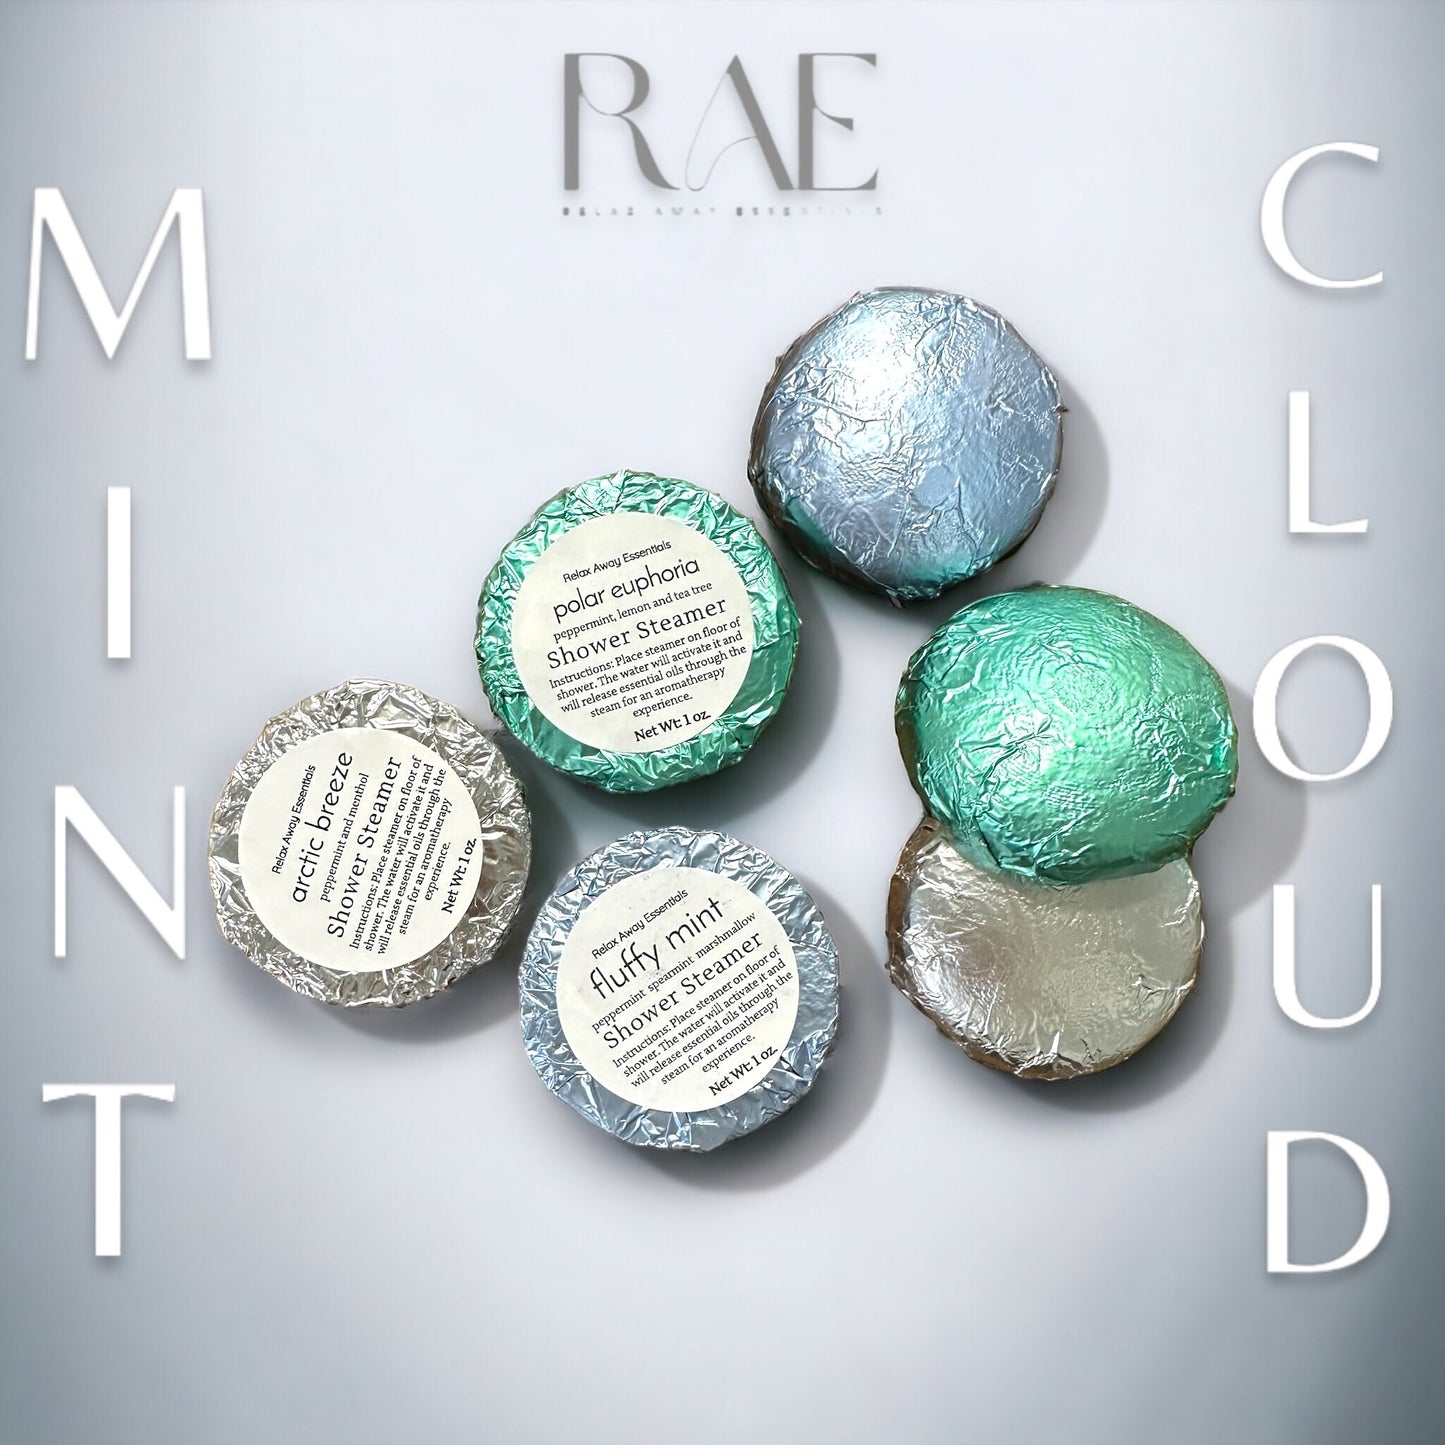 Mint Cloud Shower Steamers | Peppermint Essential Oil | Spa Gift | Aromatherapy | Get Well Soon Gift | Relief | Natural Ingredients